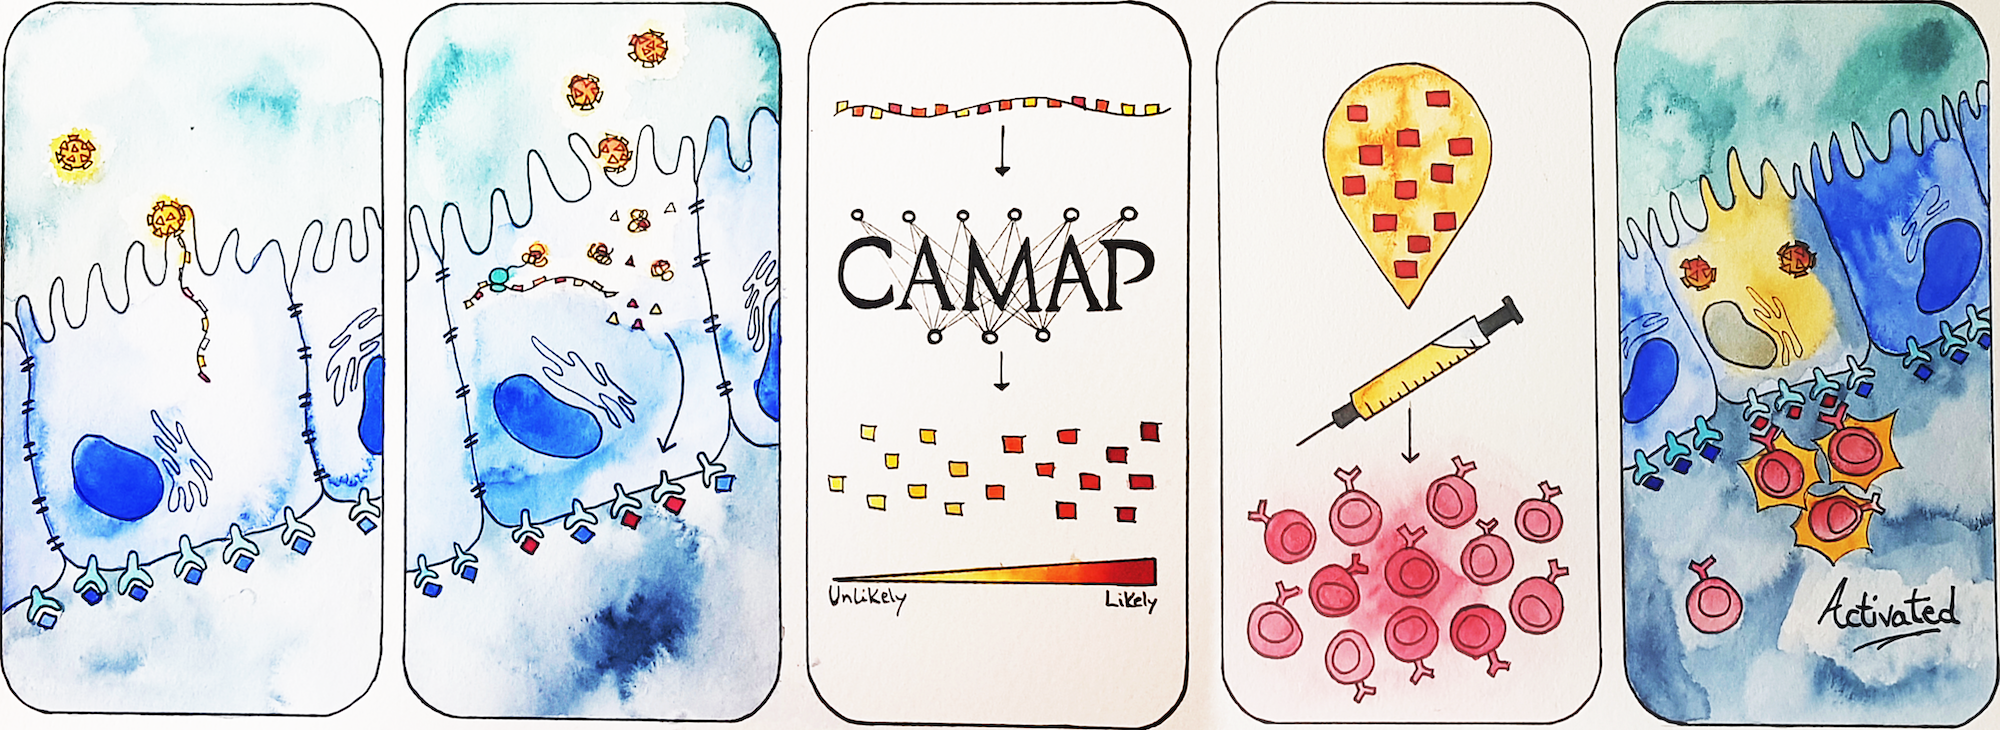 How Epitopes.world's AI algorithm, called CAMAP, can help develop a COVID-19 vaccine